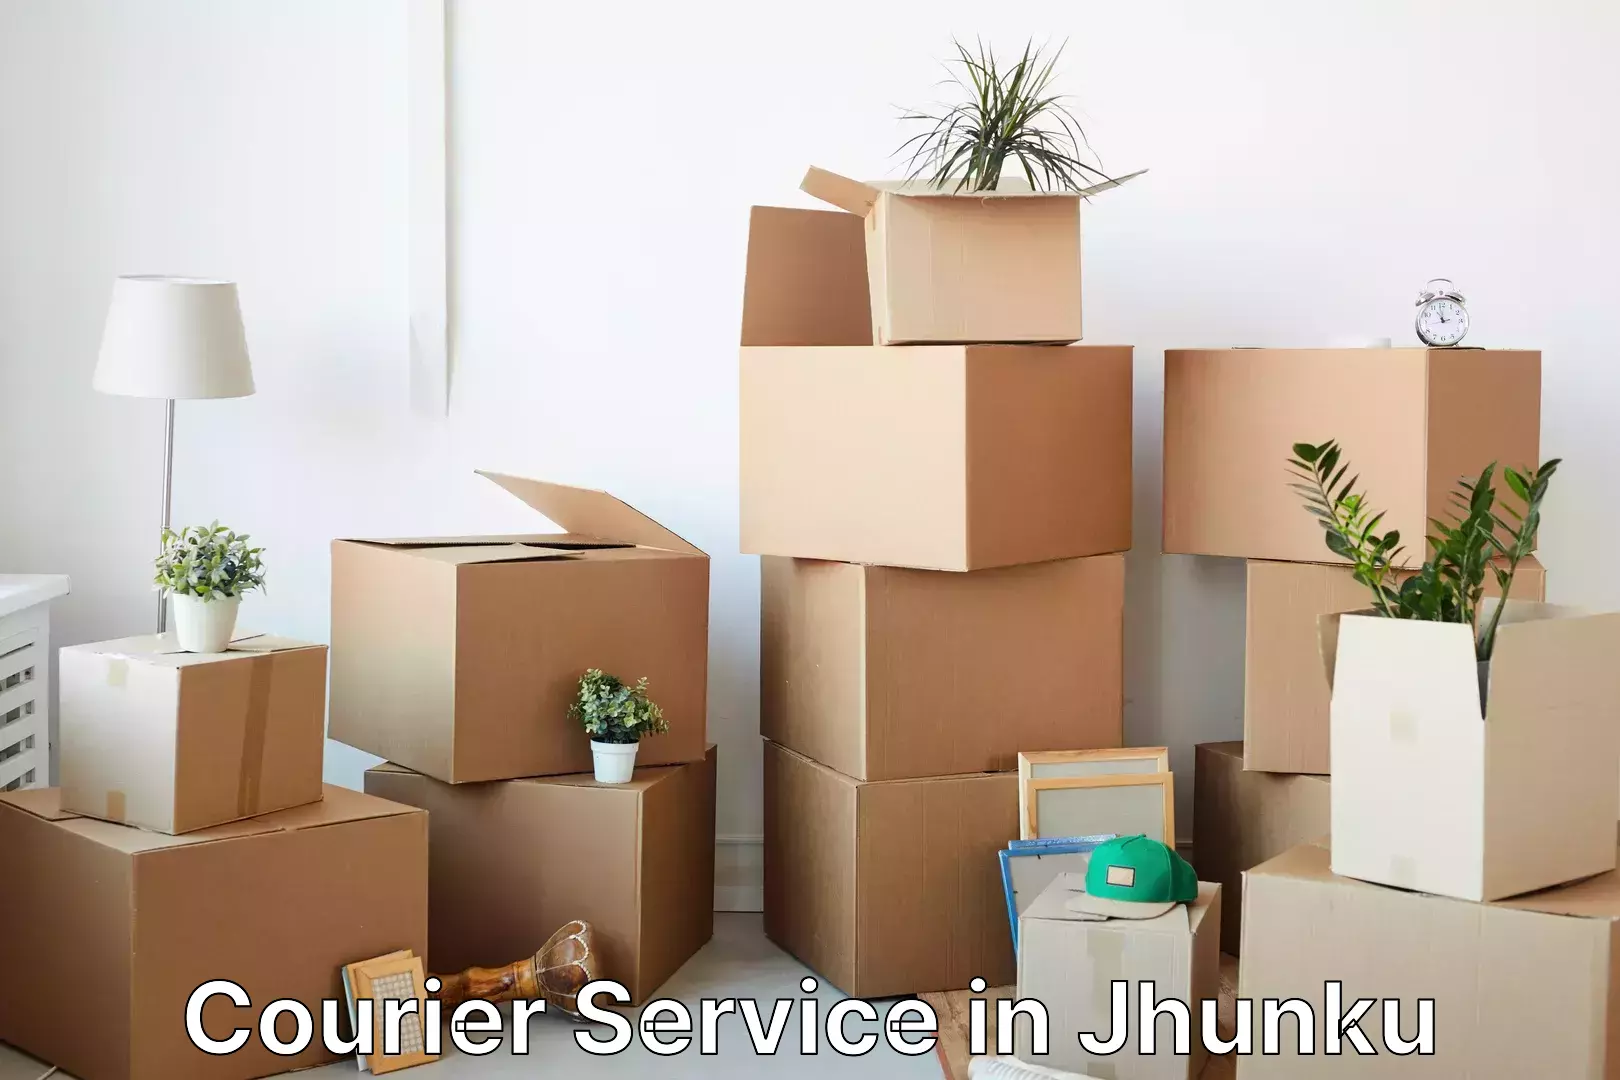 Customized delivery options in Jhunku